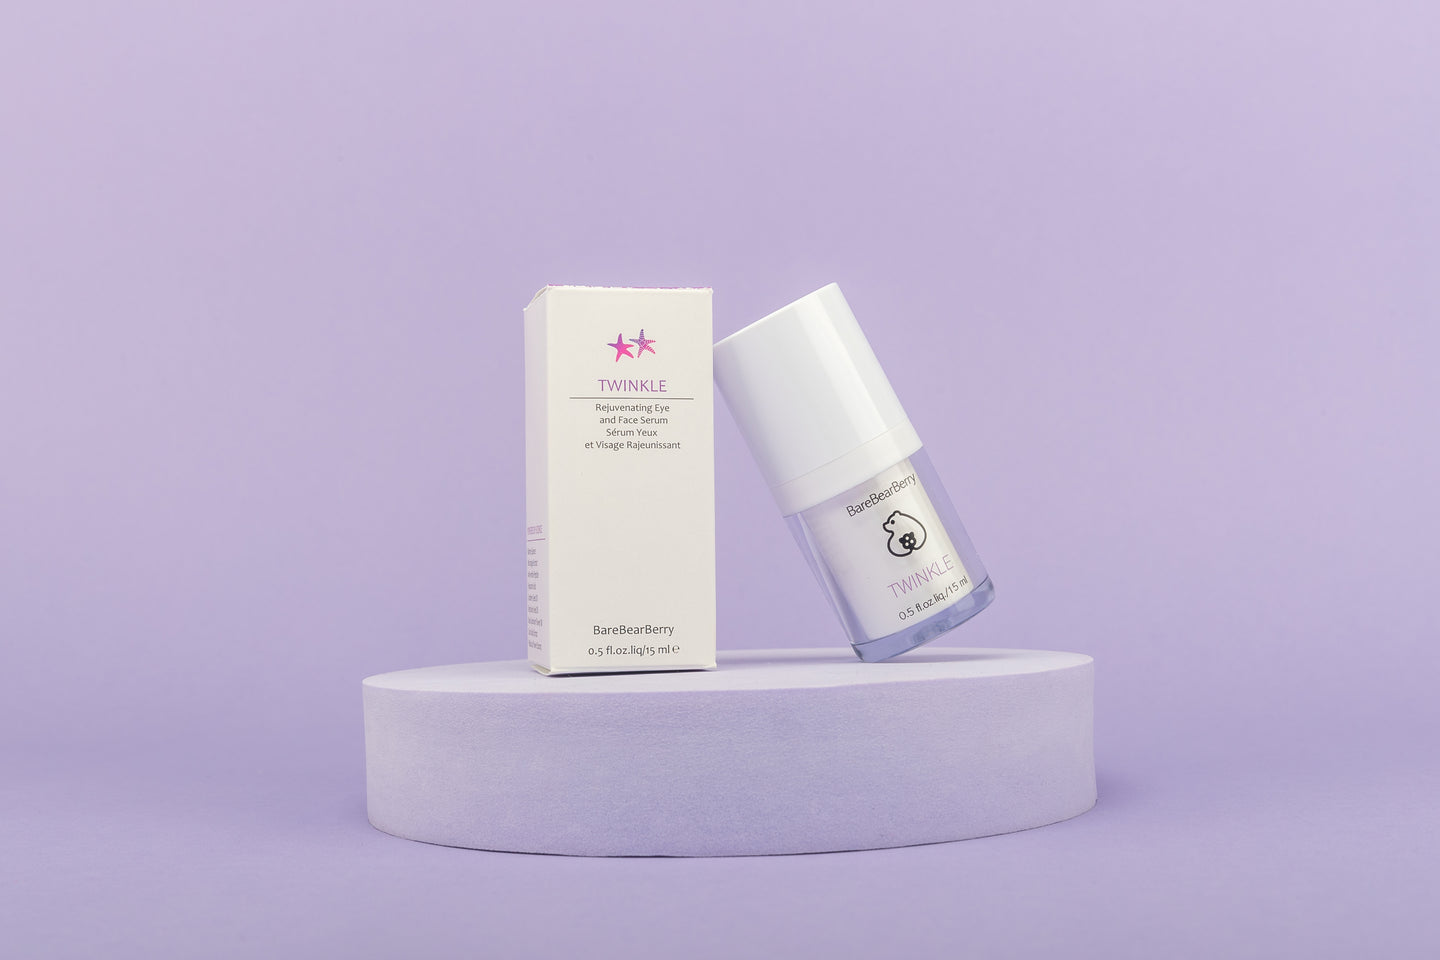 BareBearBerry TWINKLE serum reduces dark circles, eyebags, and wrinkles around the eye contour area. Its microalgae extract and anti-aging peptide help to achieve an instant tightening of skin and reduce wrinkles. 